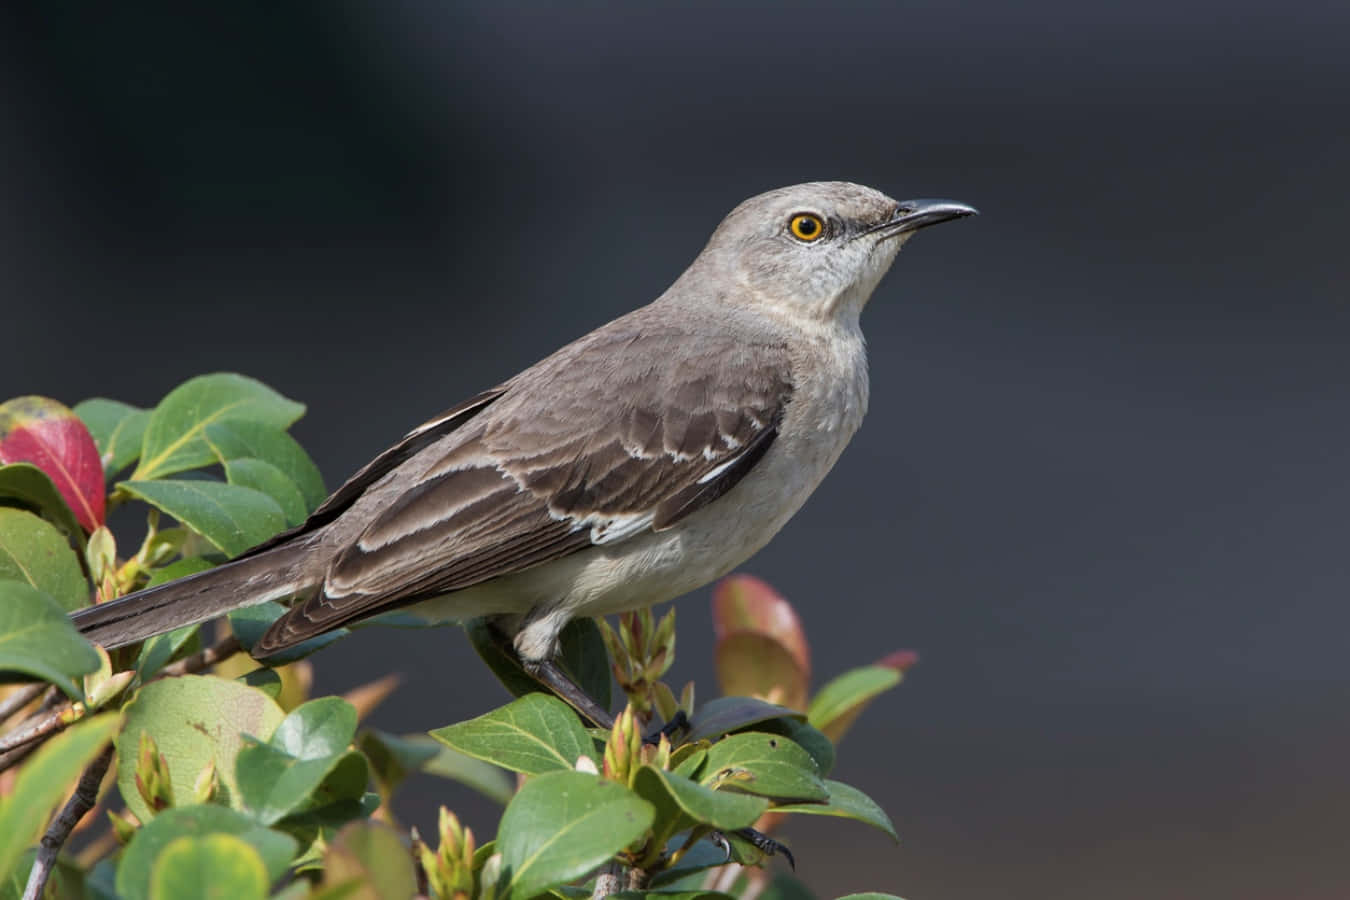 A Mockingbird Singing on a Branches